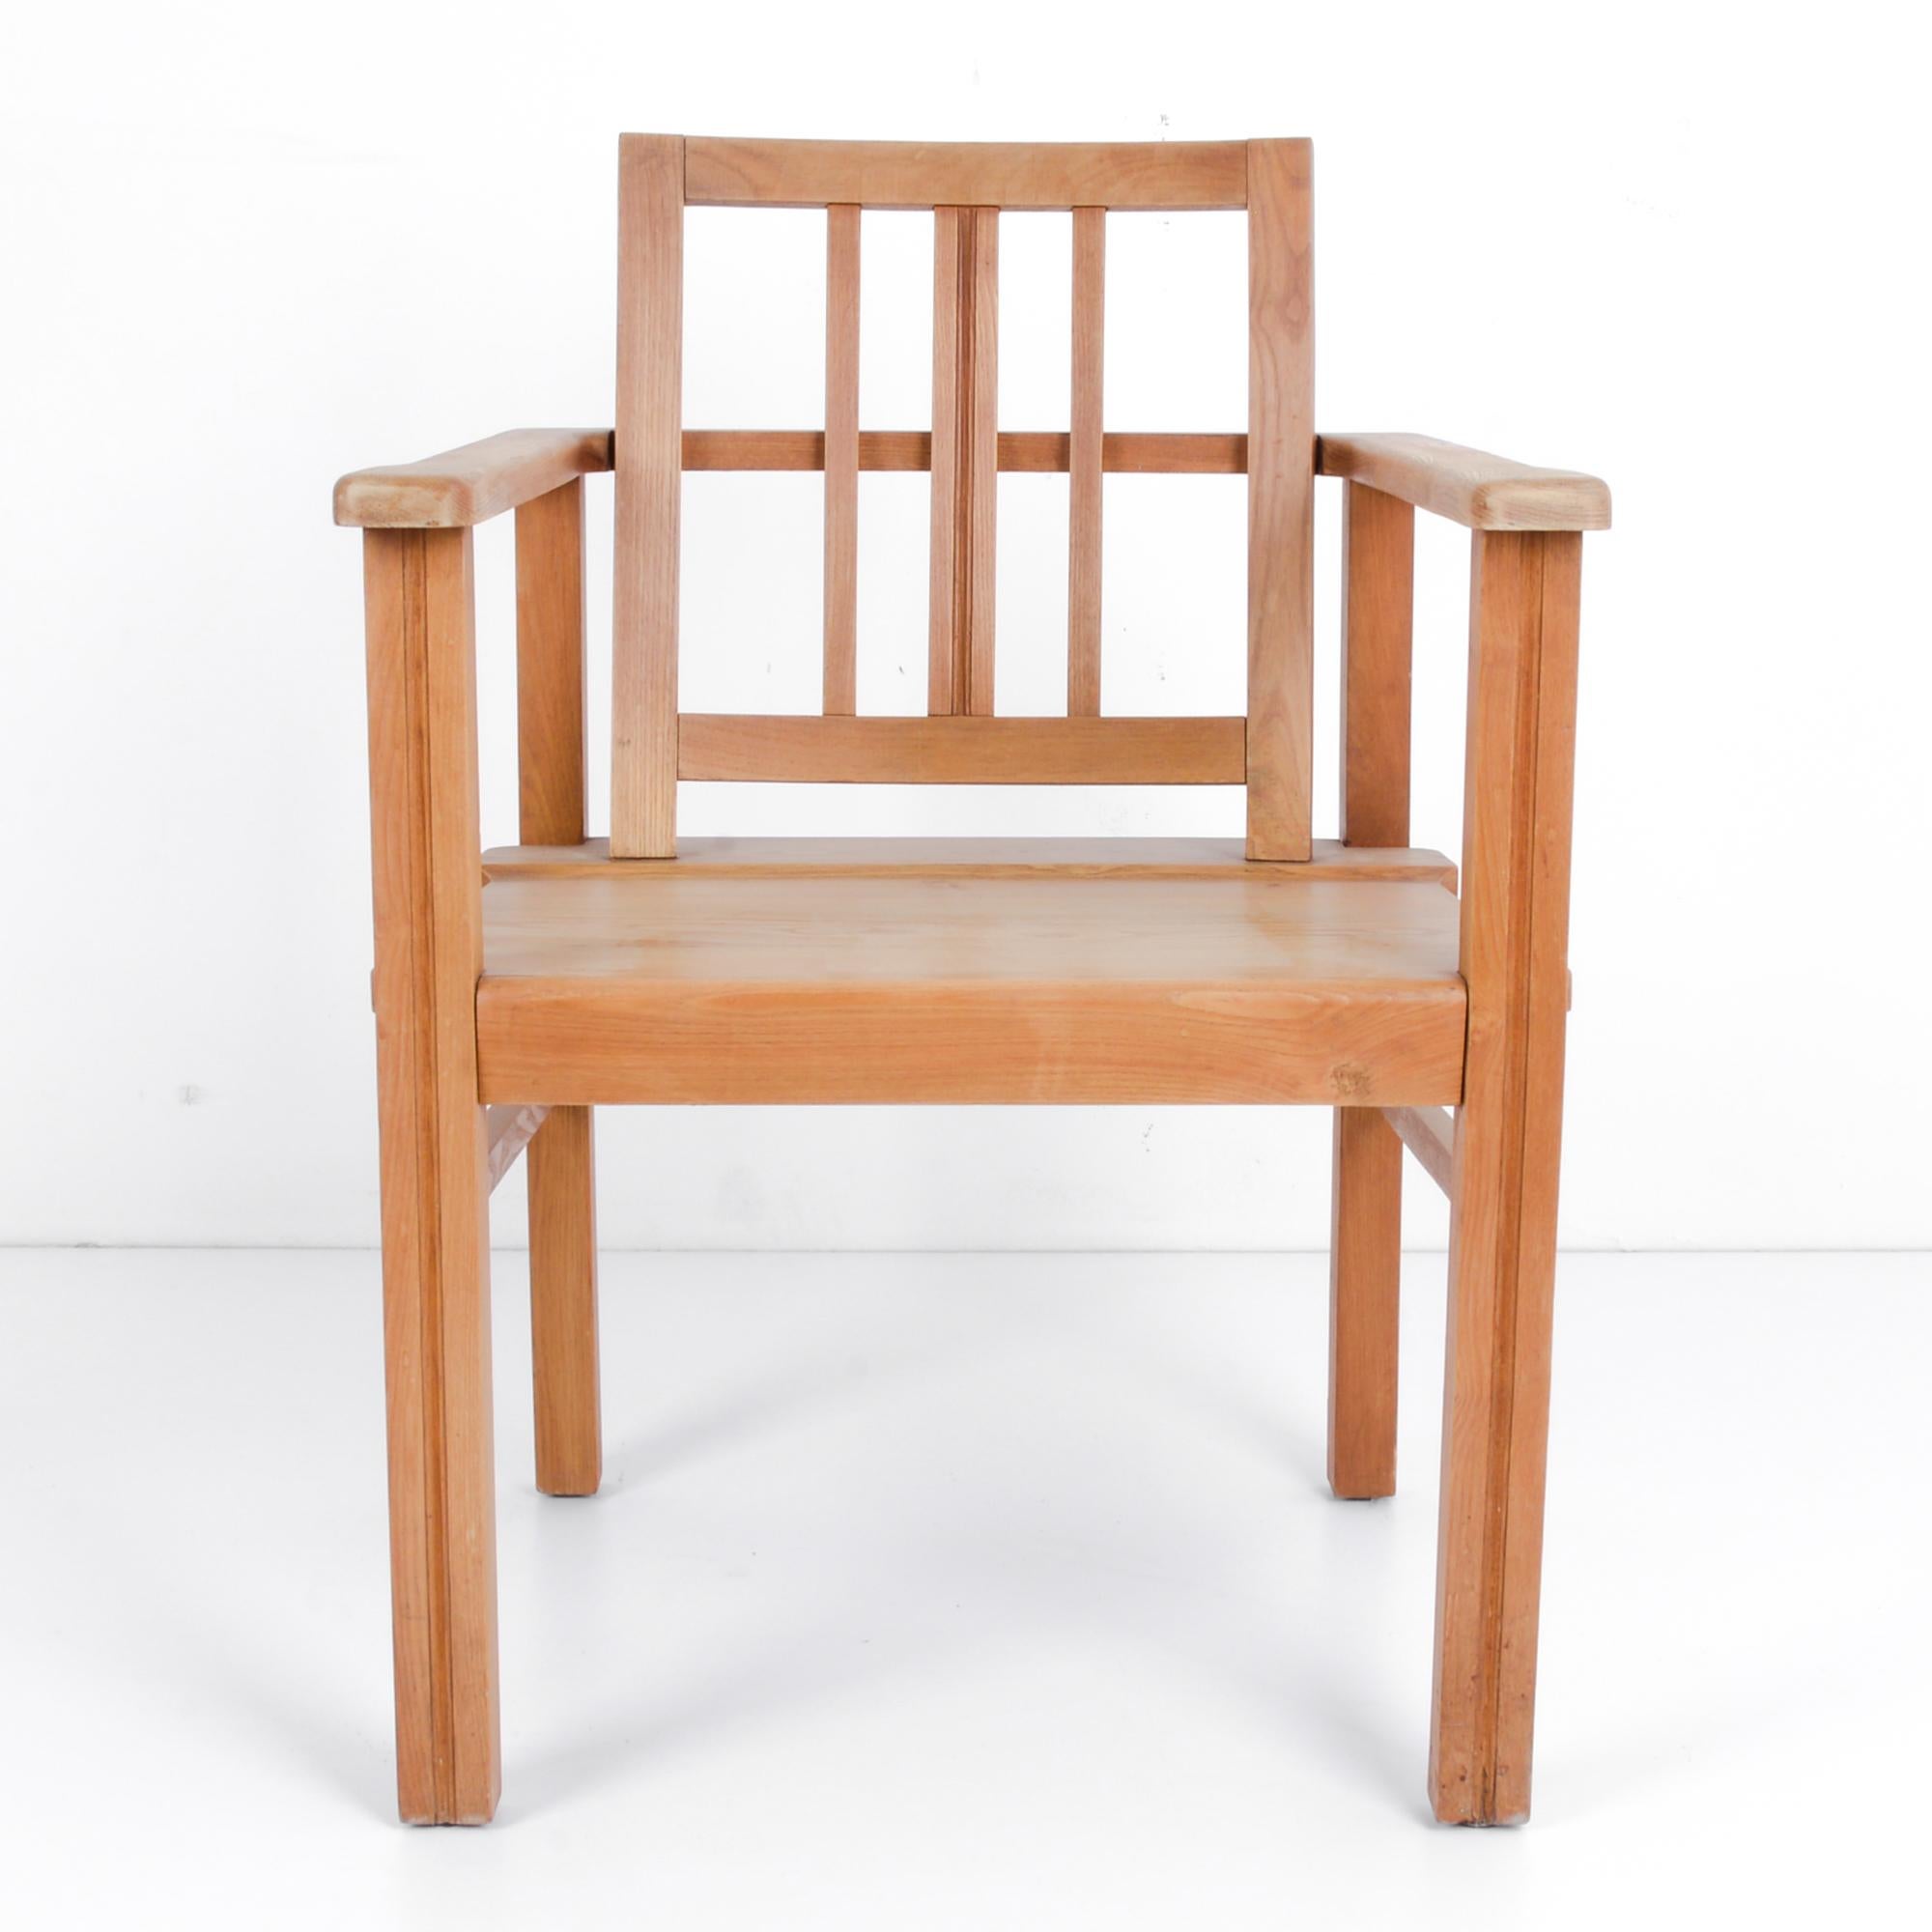 This wooden armchair was made in Denmark, circa 1970, and features a geometric silhouette. The slats of the backrest and spaces between the armrests and seats give the chair an airiness, which plays with the wide proportions and angularity of the